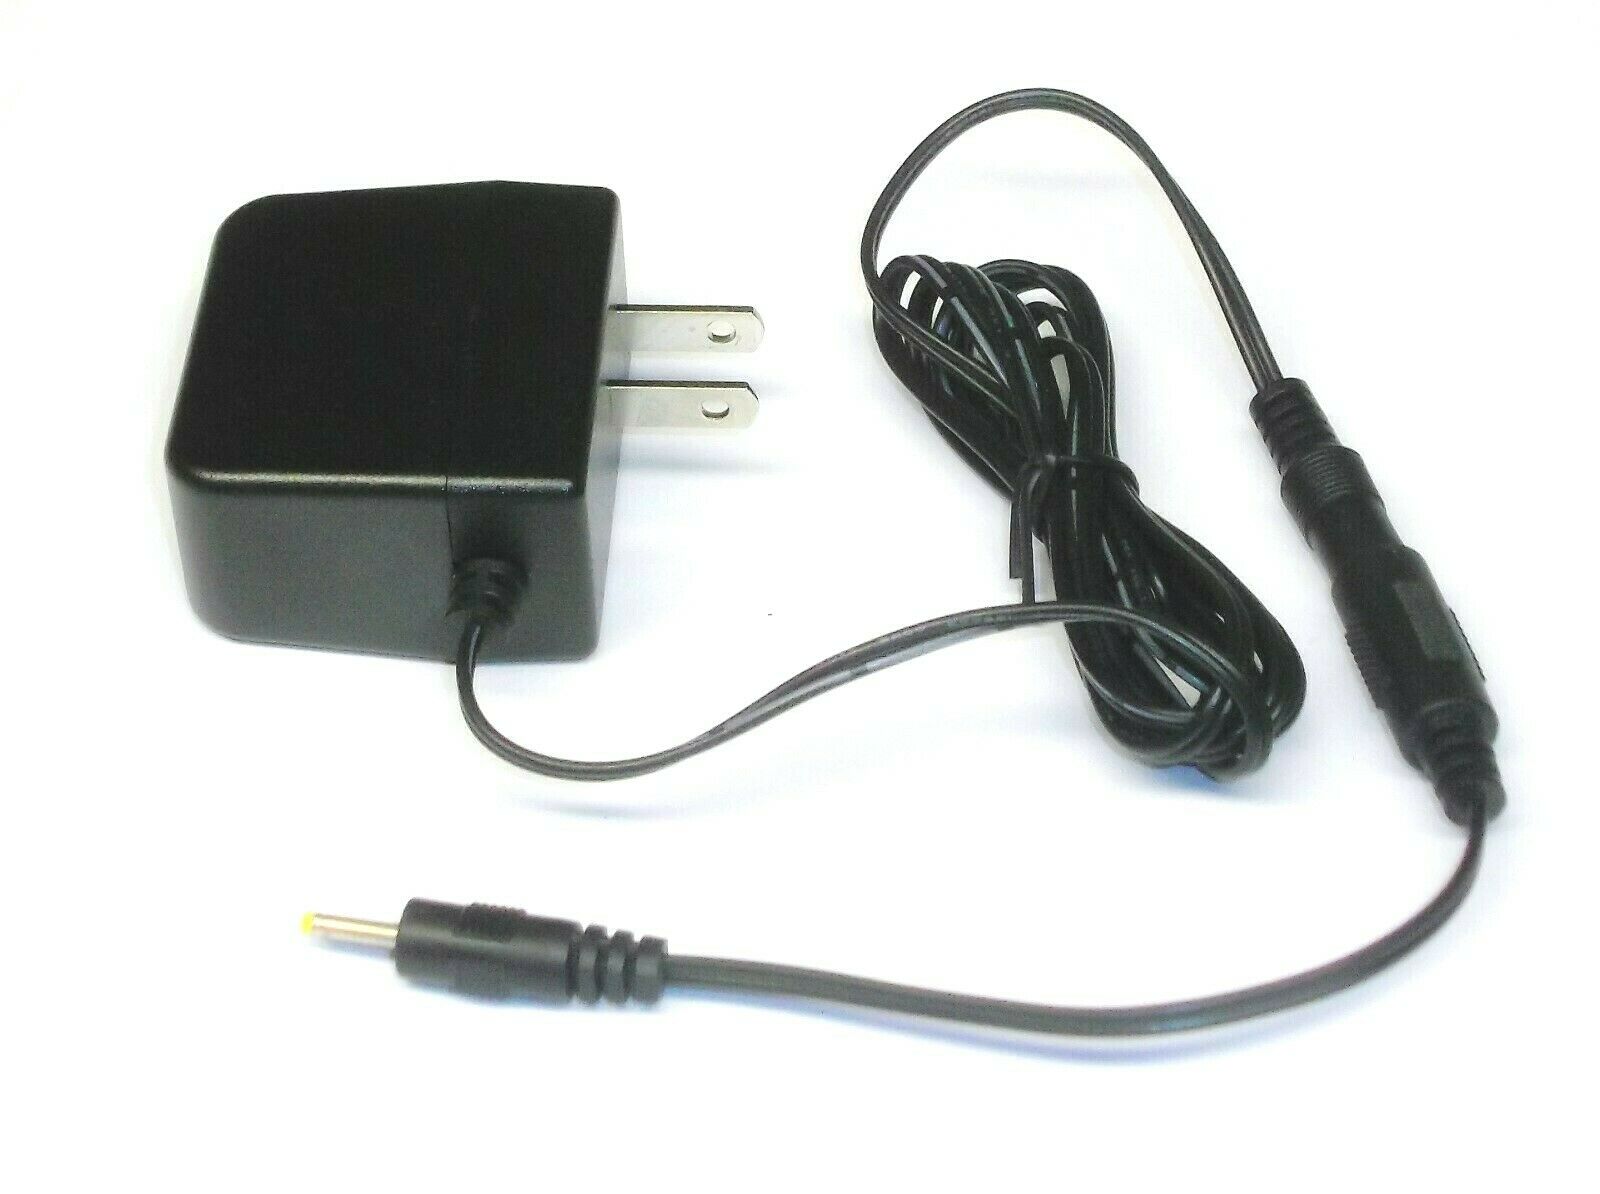 8.4V 2A AC DC Adapter Charger For Sony PCS-AC08 PCS-AC08/1 Power Supply Cord Construction: 100% Brand New! Generic Repl